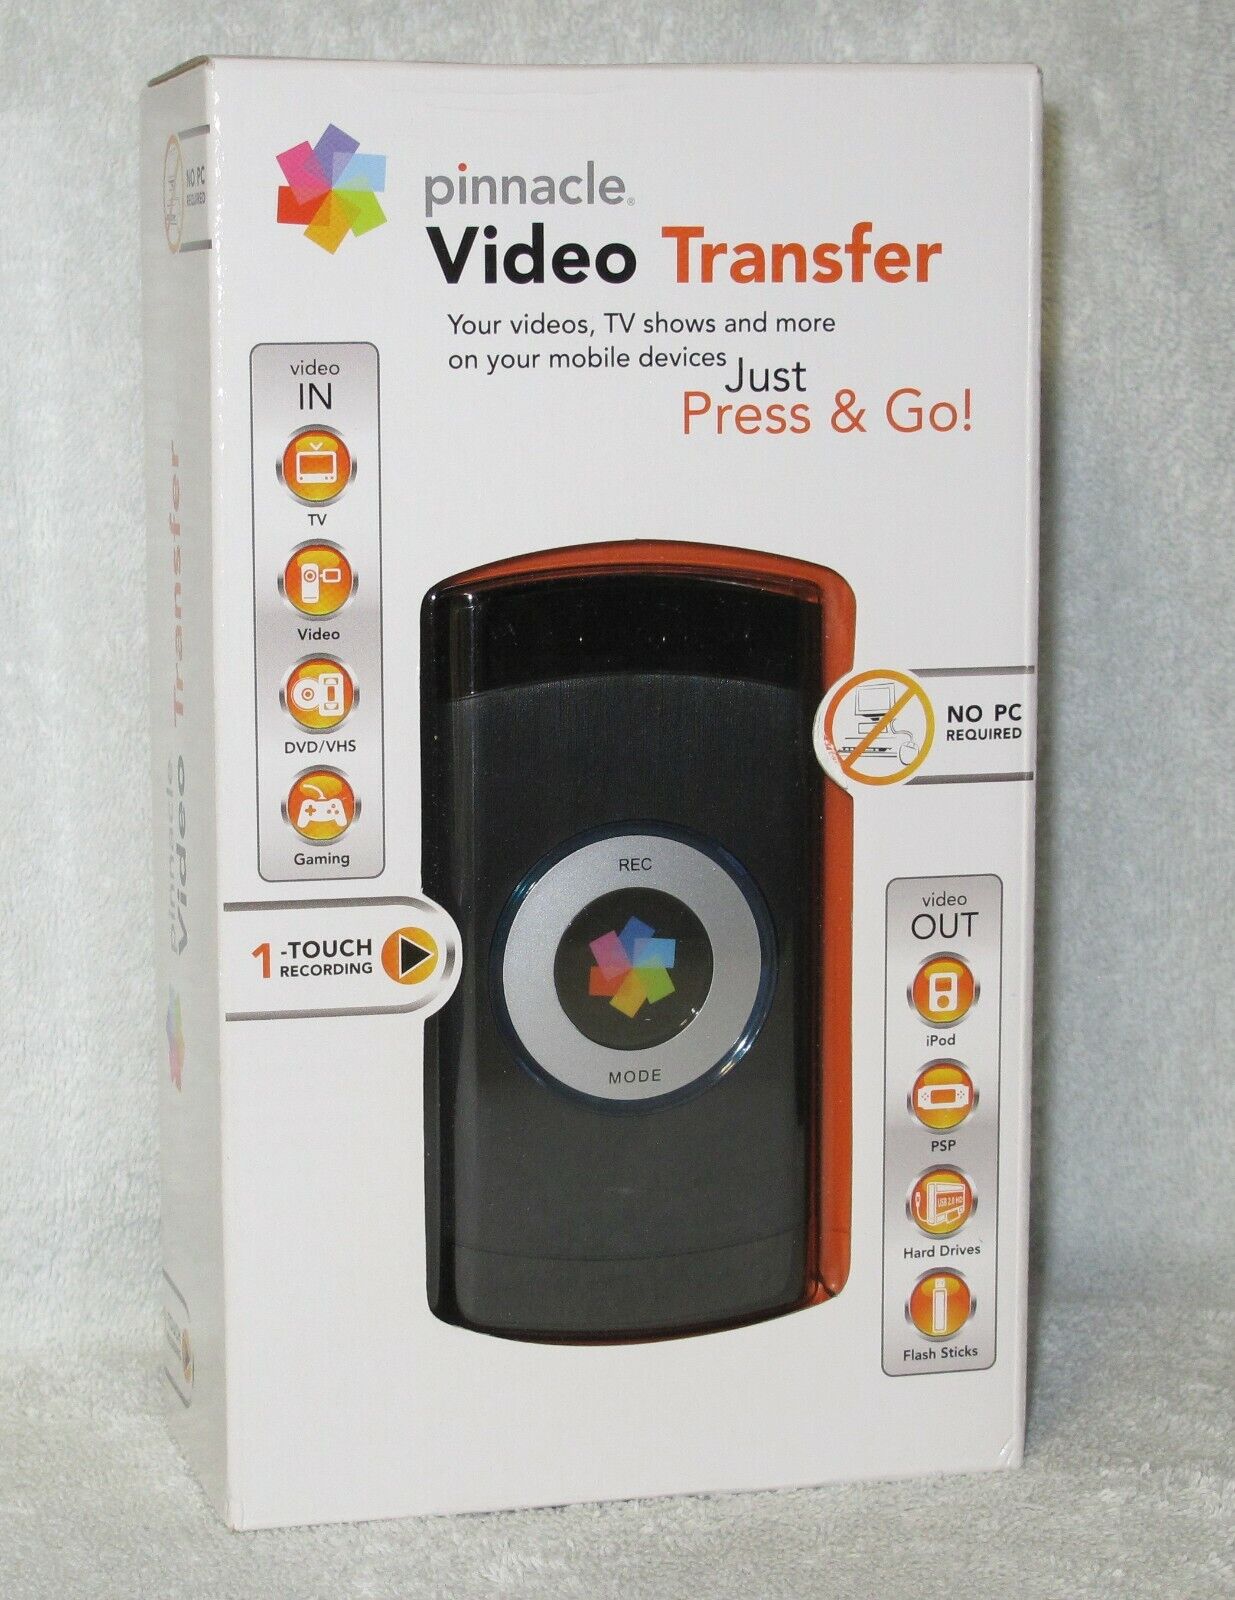 Pinnacle Video Transfer Device - No PC Required